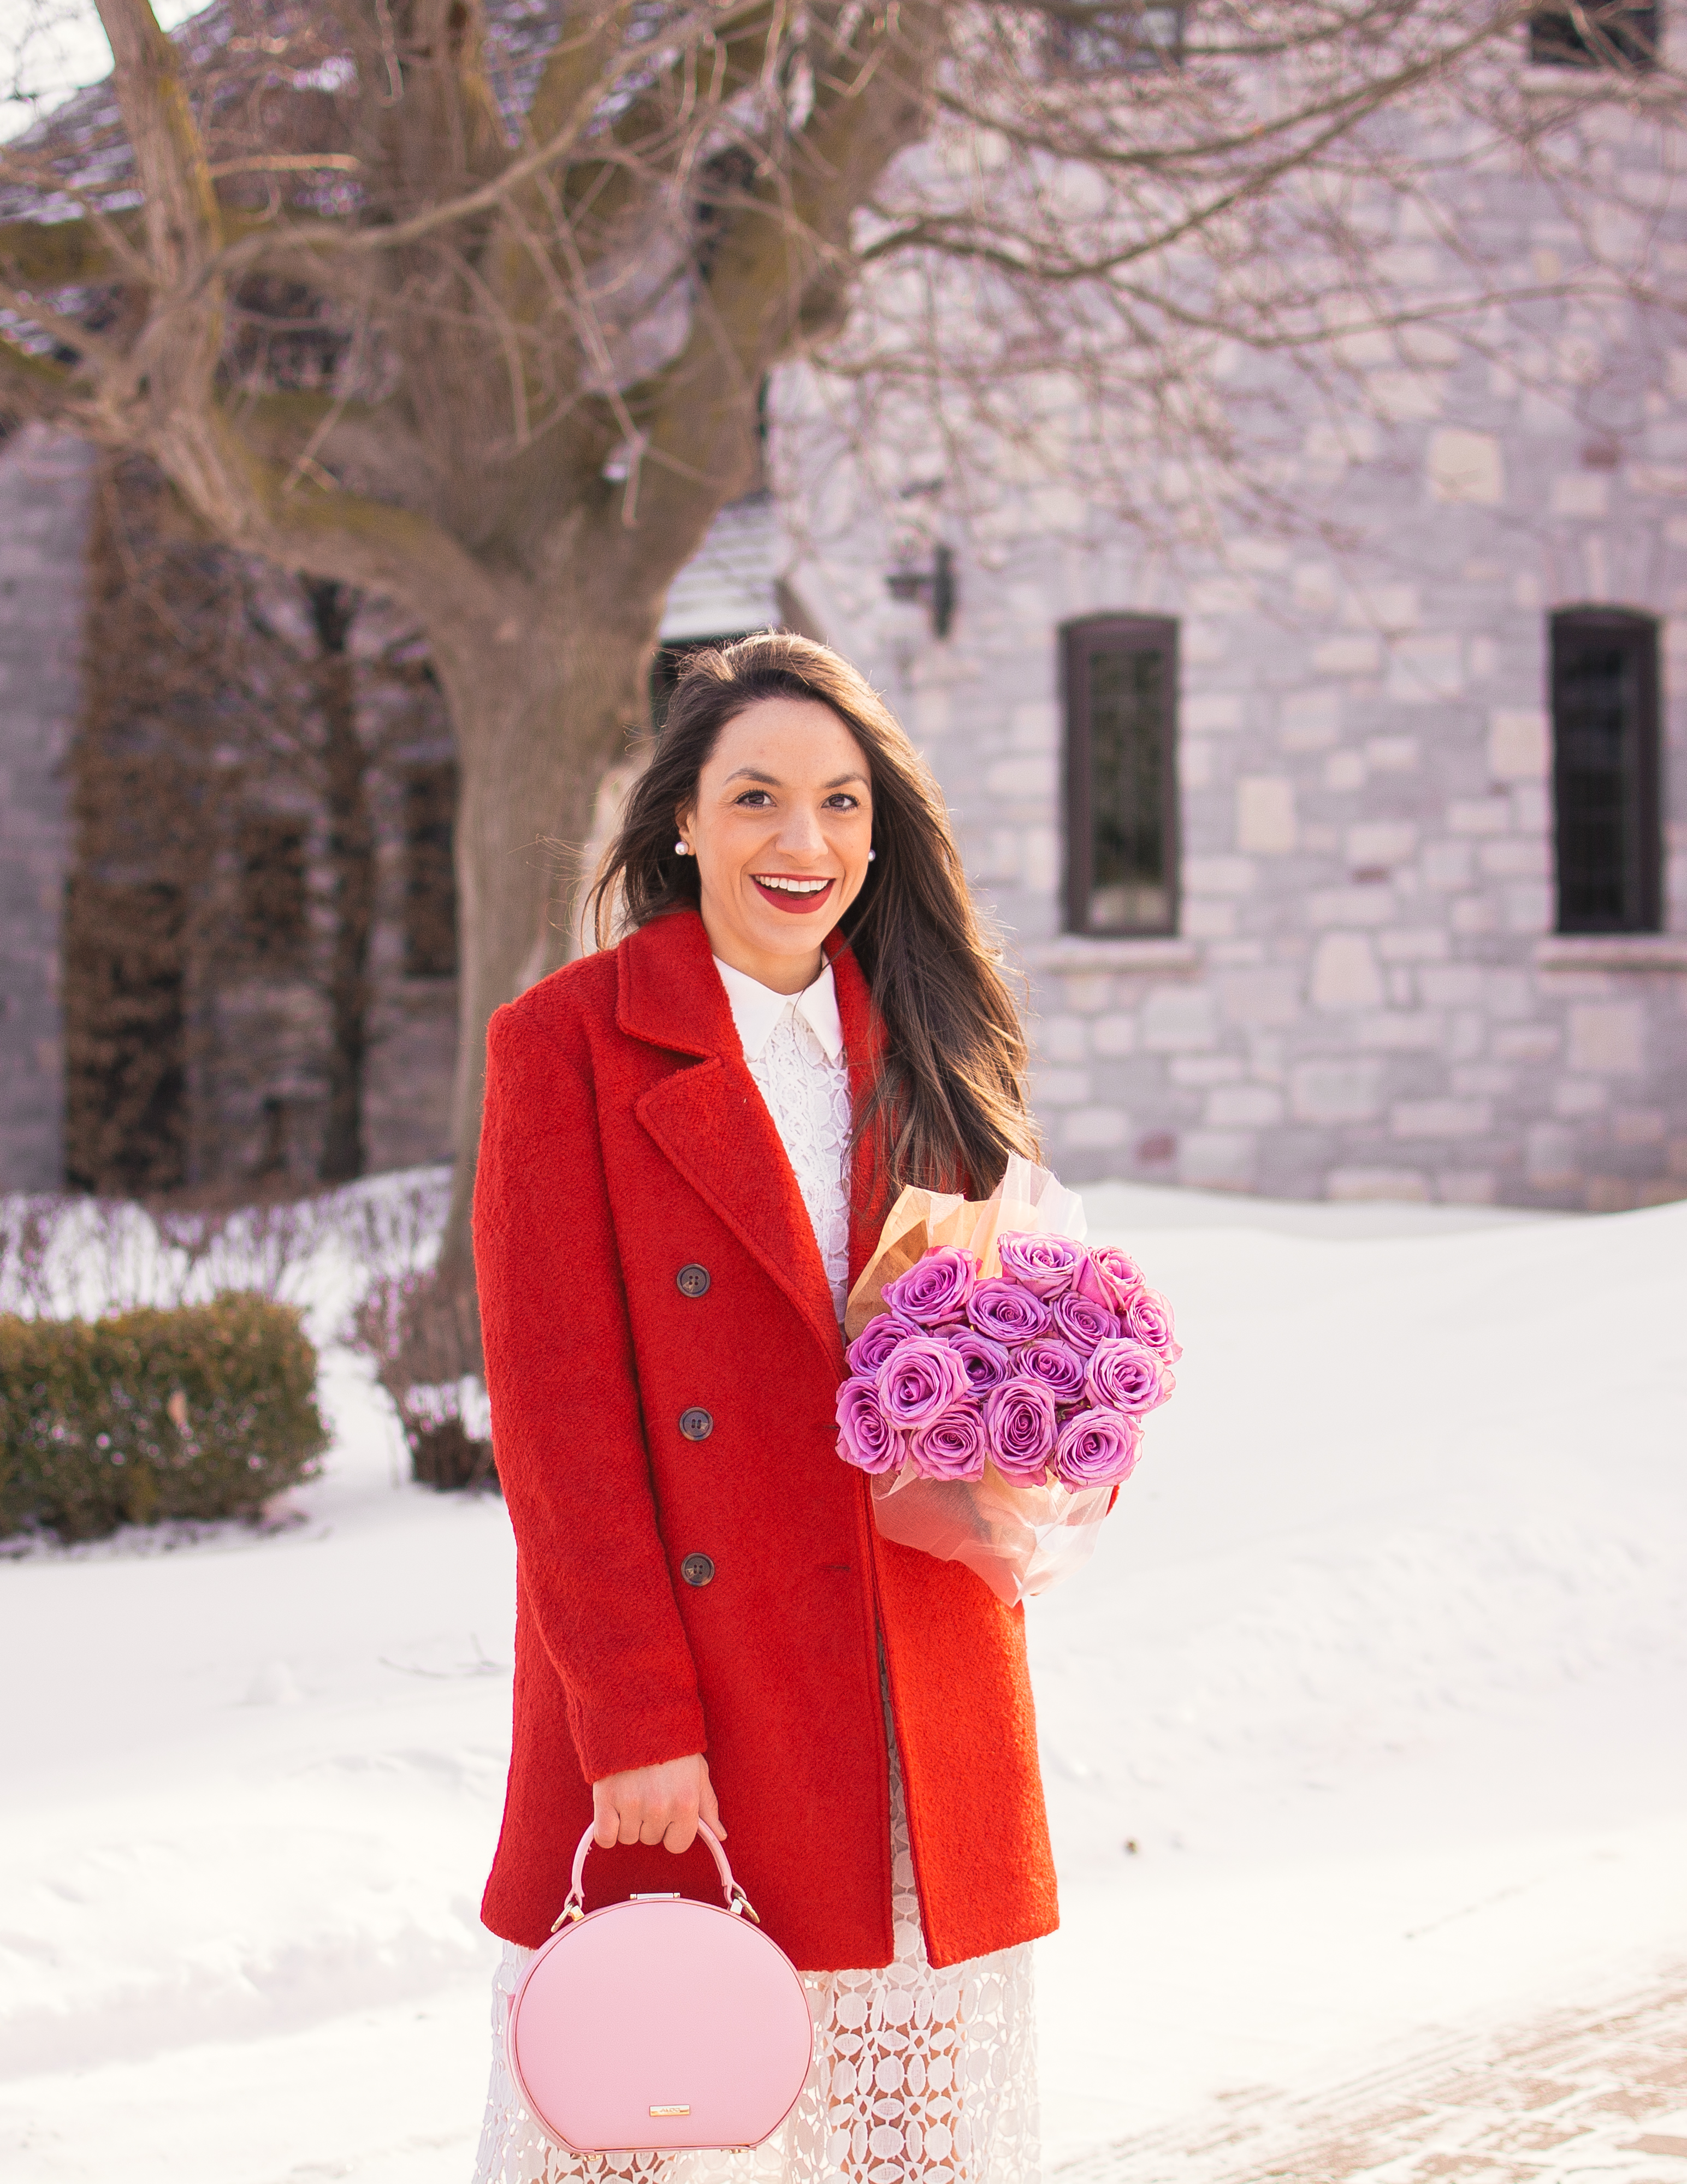 My Favourite Red Pieces for Valentine's Day | Red Coat| |White Lace Dress| Pink Flowers | Winter Looks | The Pink Brunette 